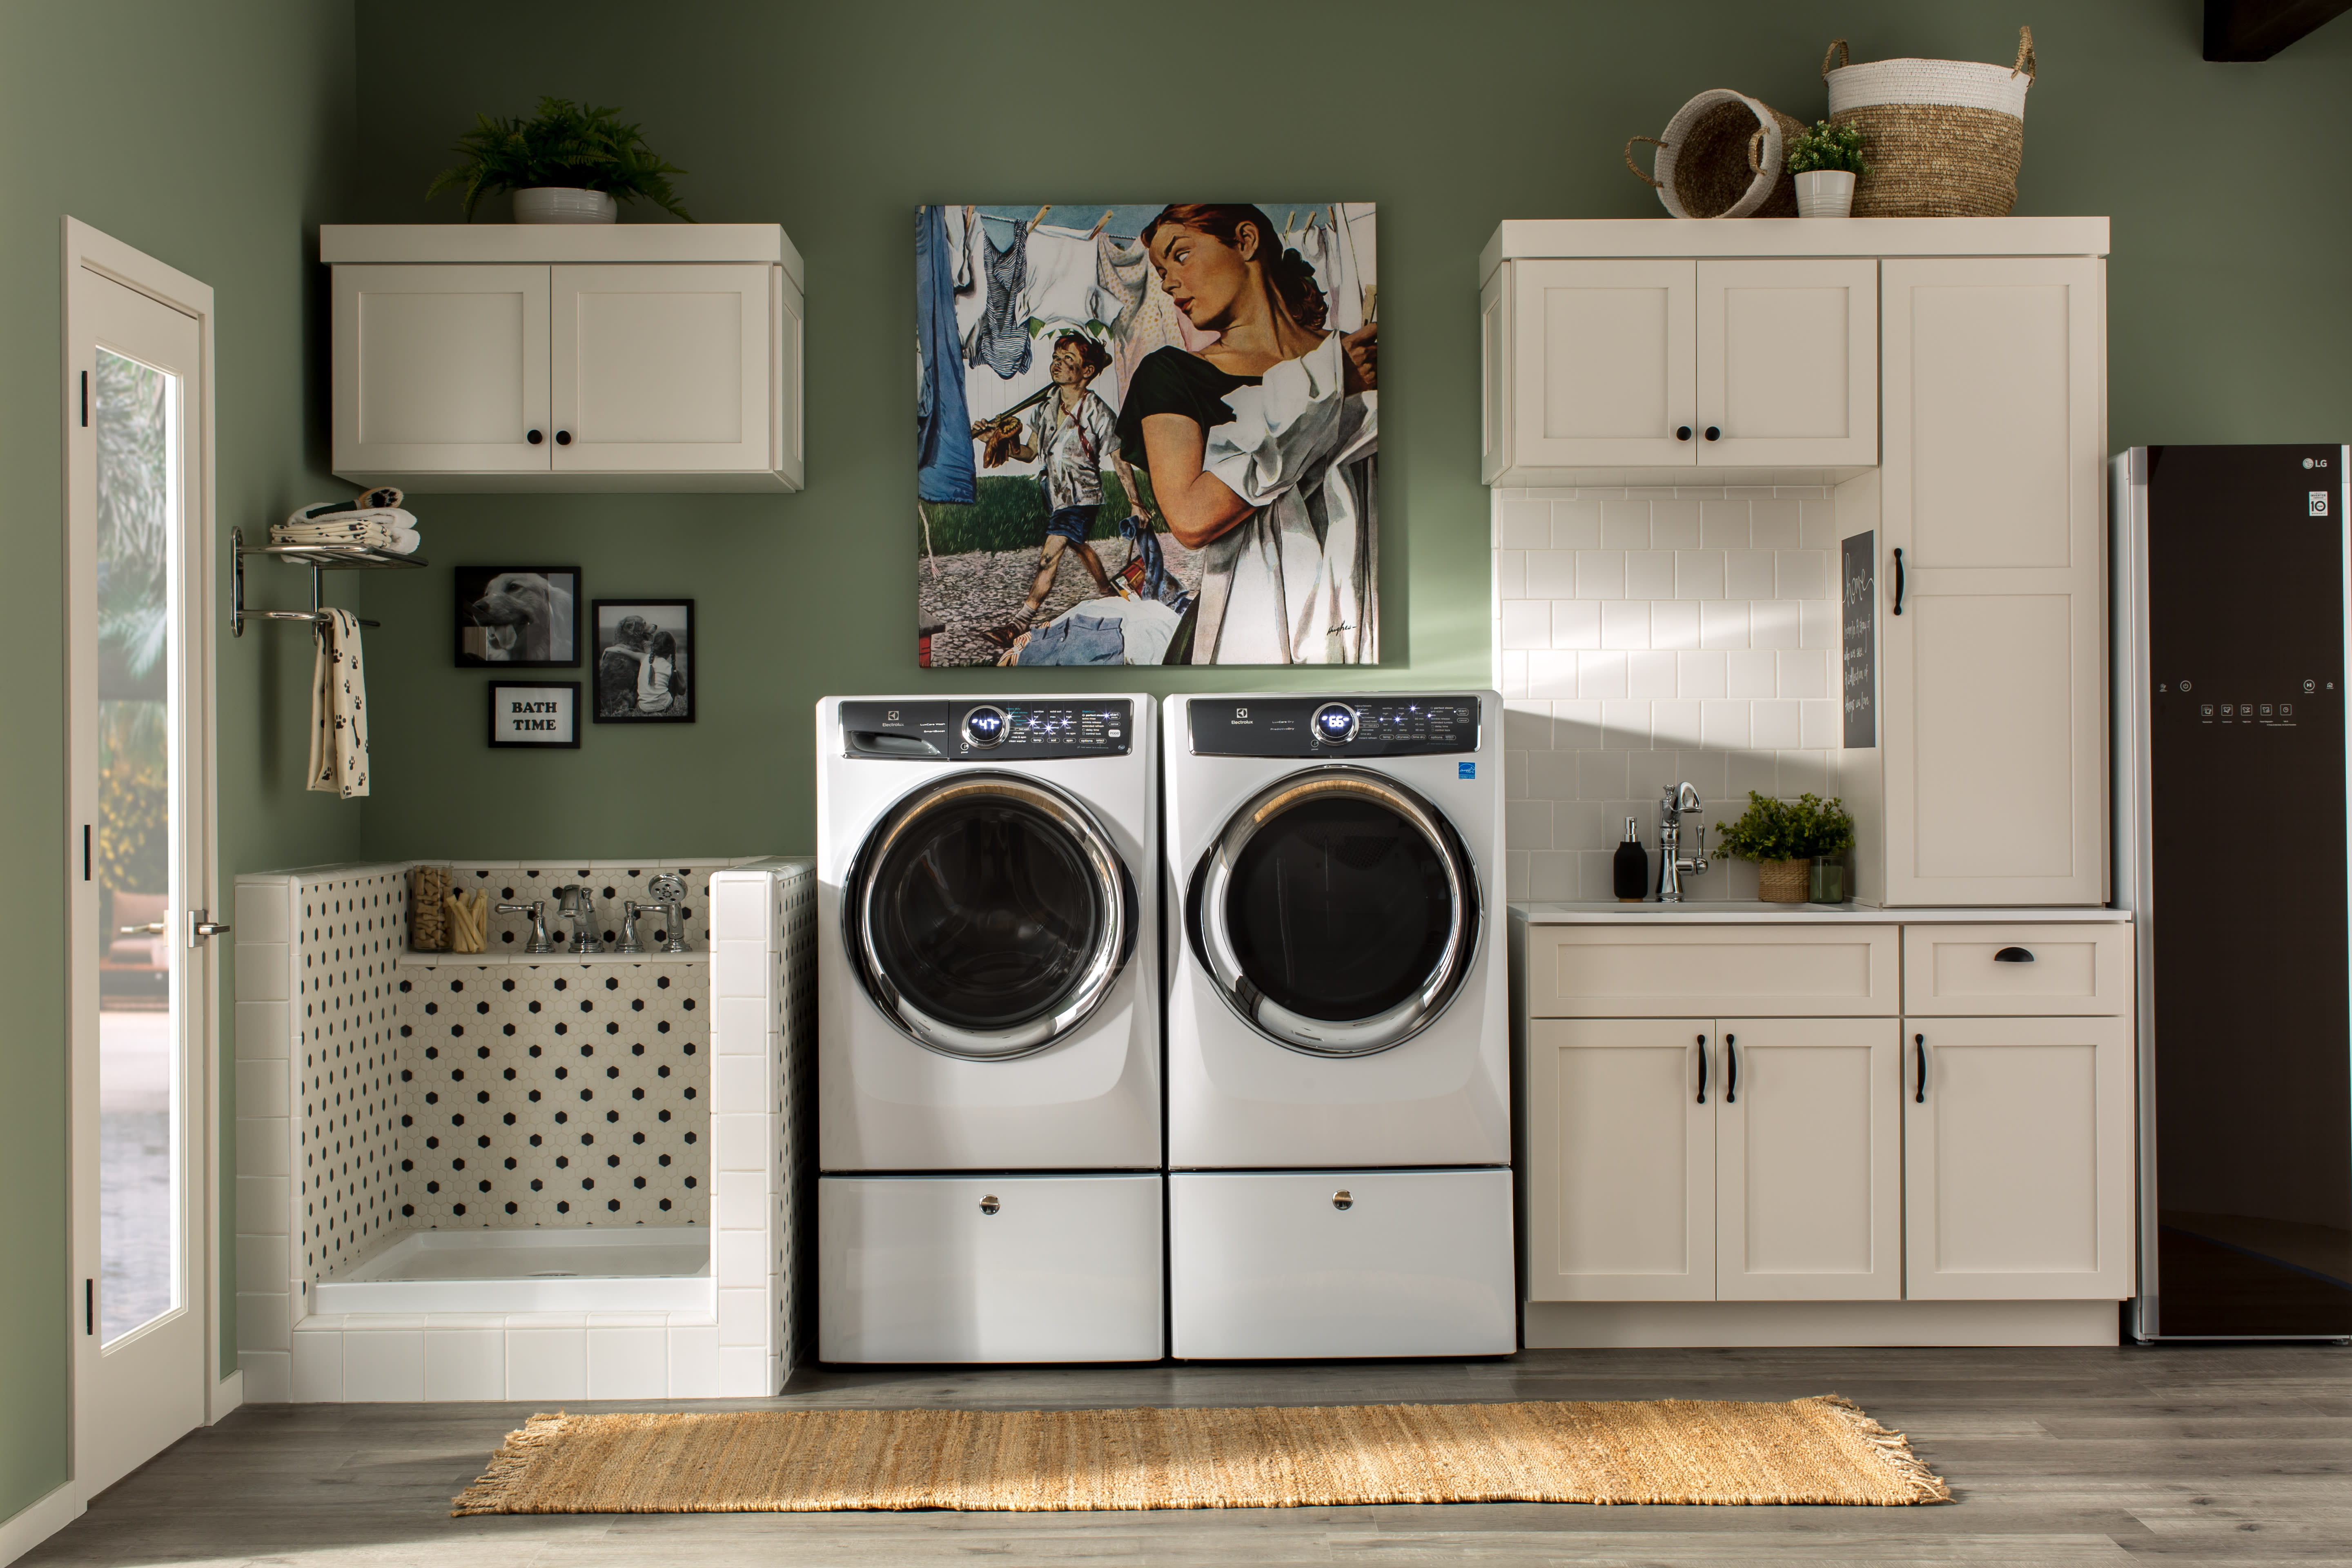 Make Your Laundry Room Work for You